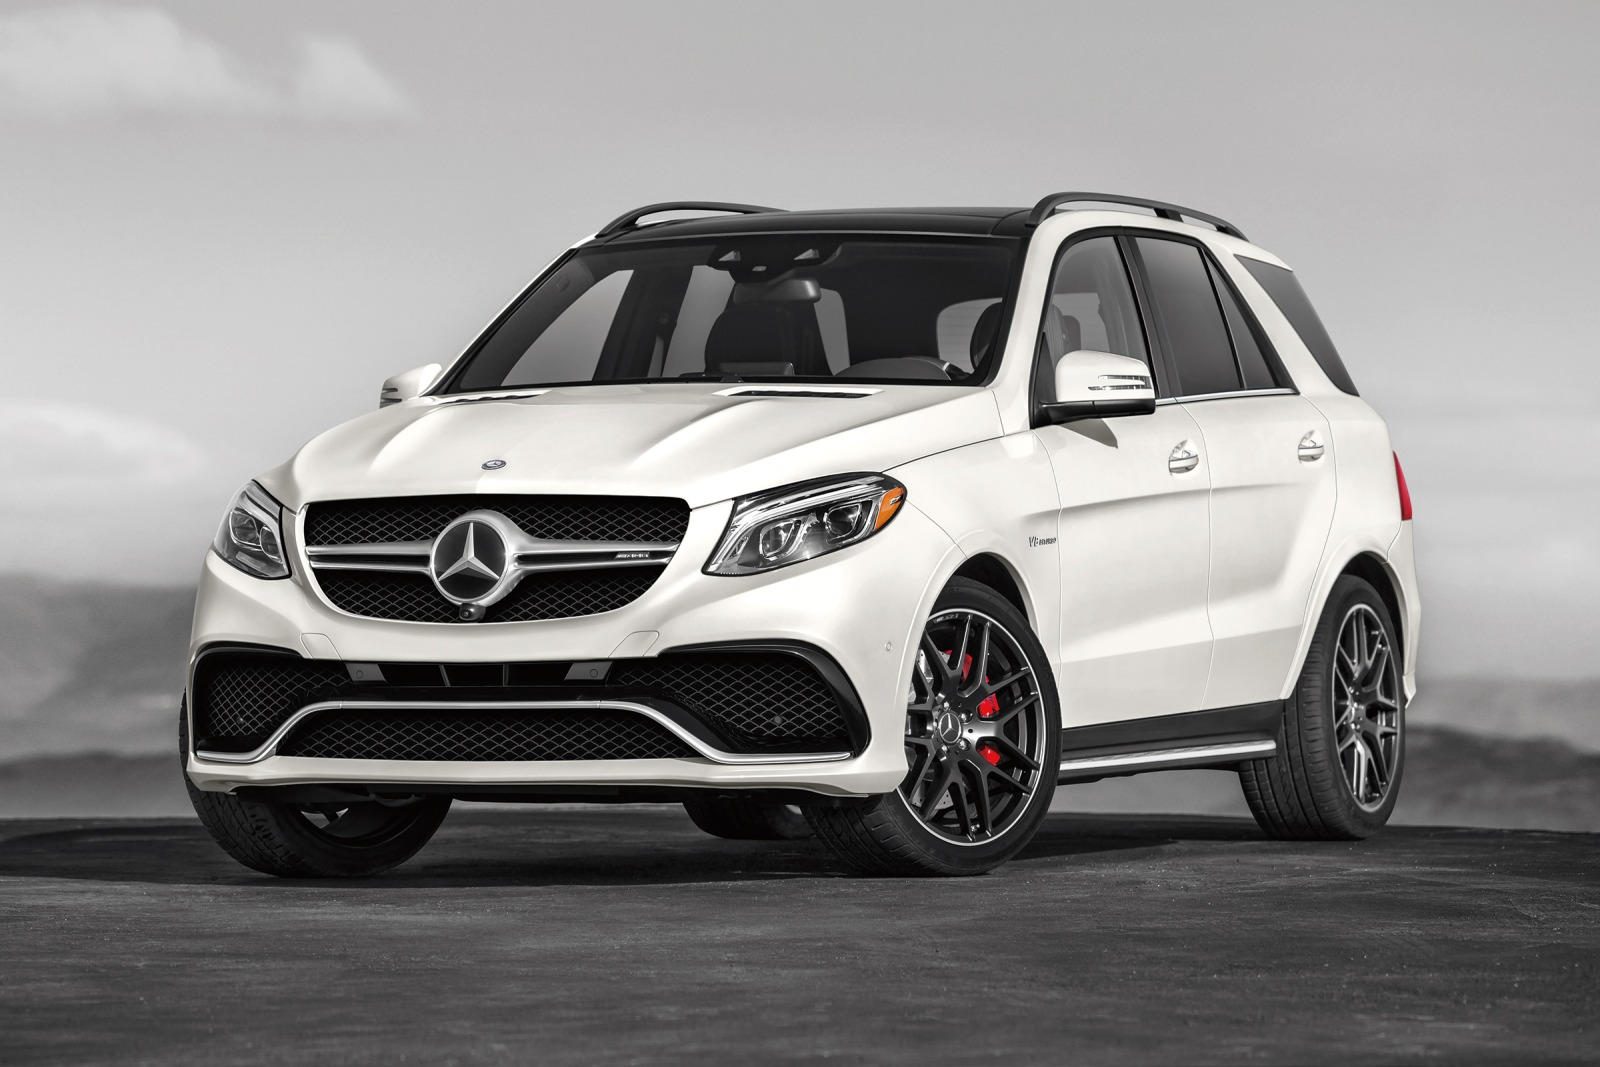 2016 Mercedes-AMG GLE 63 SUV Front Angle View